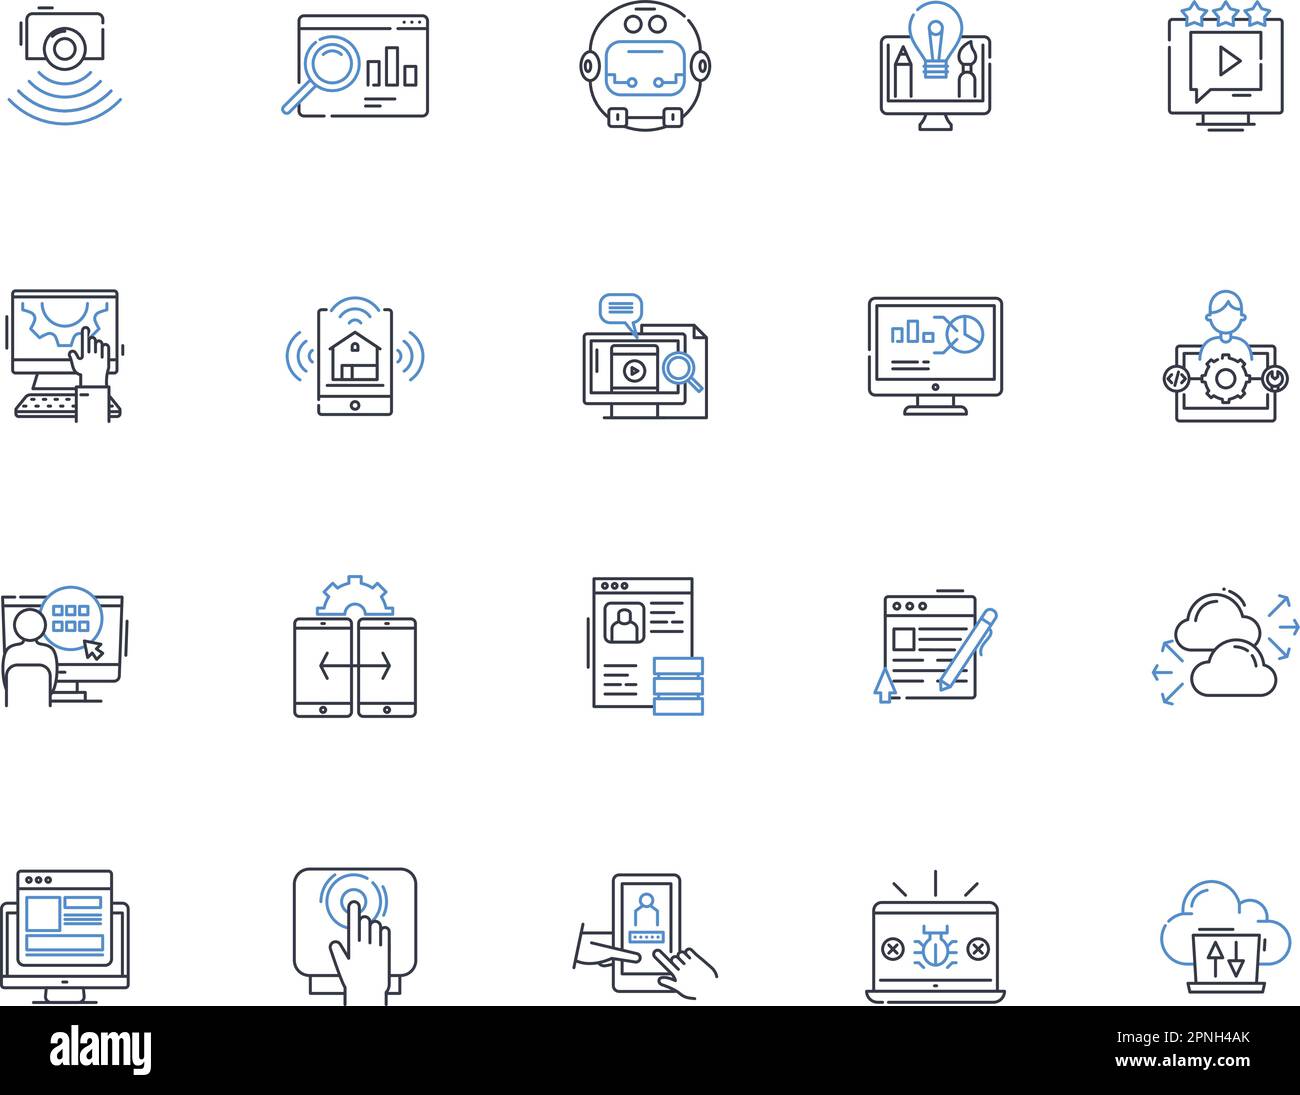 Mechanism line icons collection. Gears, Springs, Cogs, Levers, Pulleys, Hydraulics, Pneumatics vector and linear illustration. Bearings,Shaft,Clutch Stock Vector